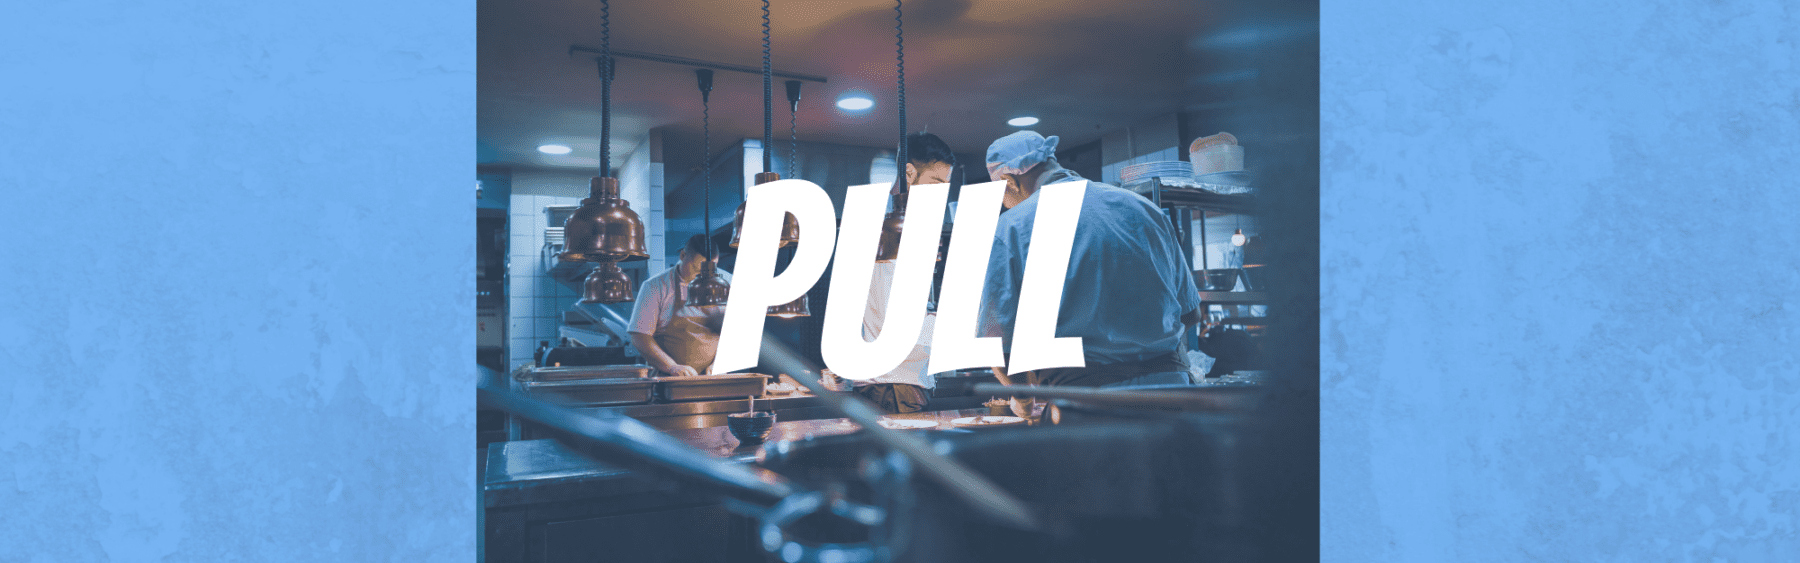 the word pull over a kitchen background